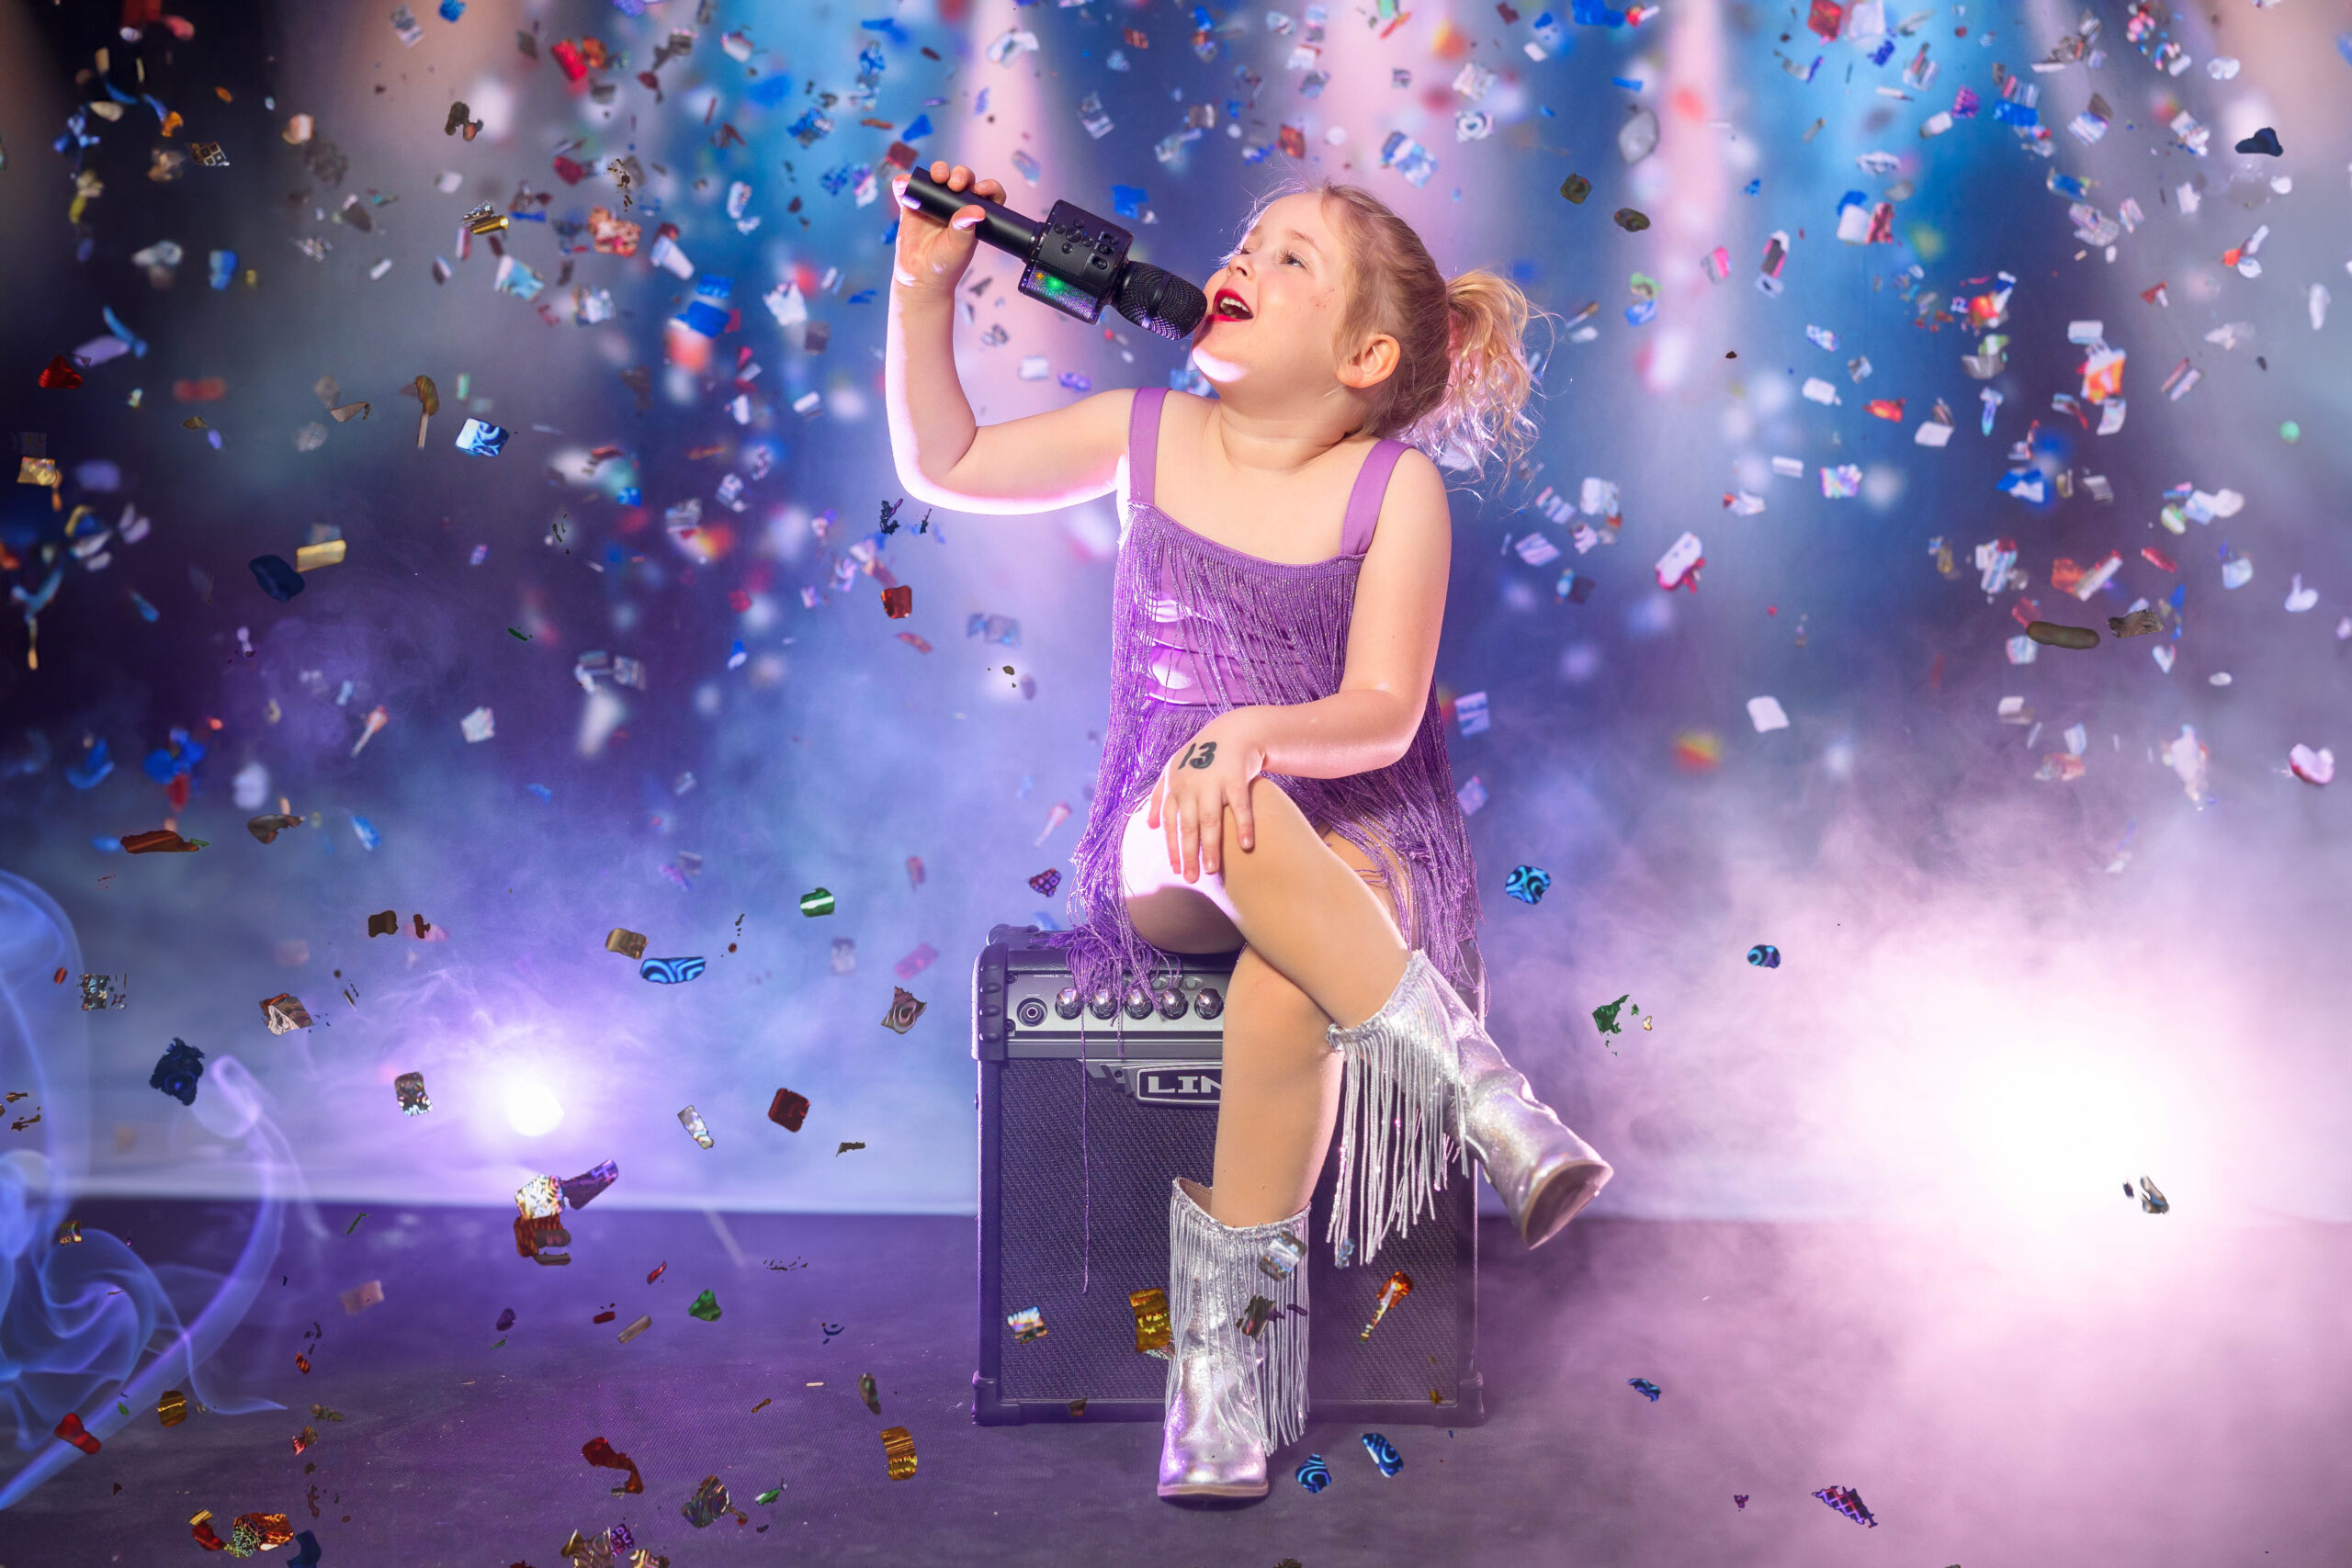 Close-up portrait of a child radiating confidence and star power in a Taylor Swift-themed mini session, capturing the essence of their inner superstar.